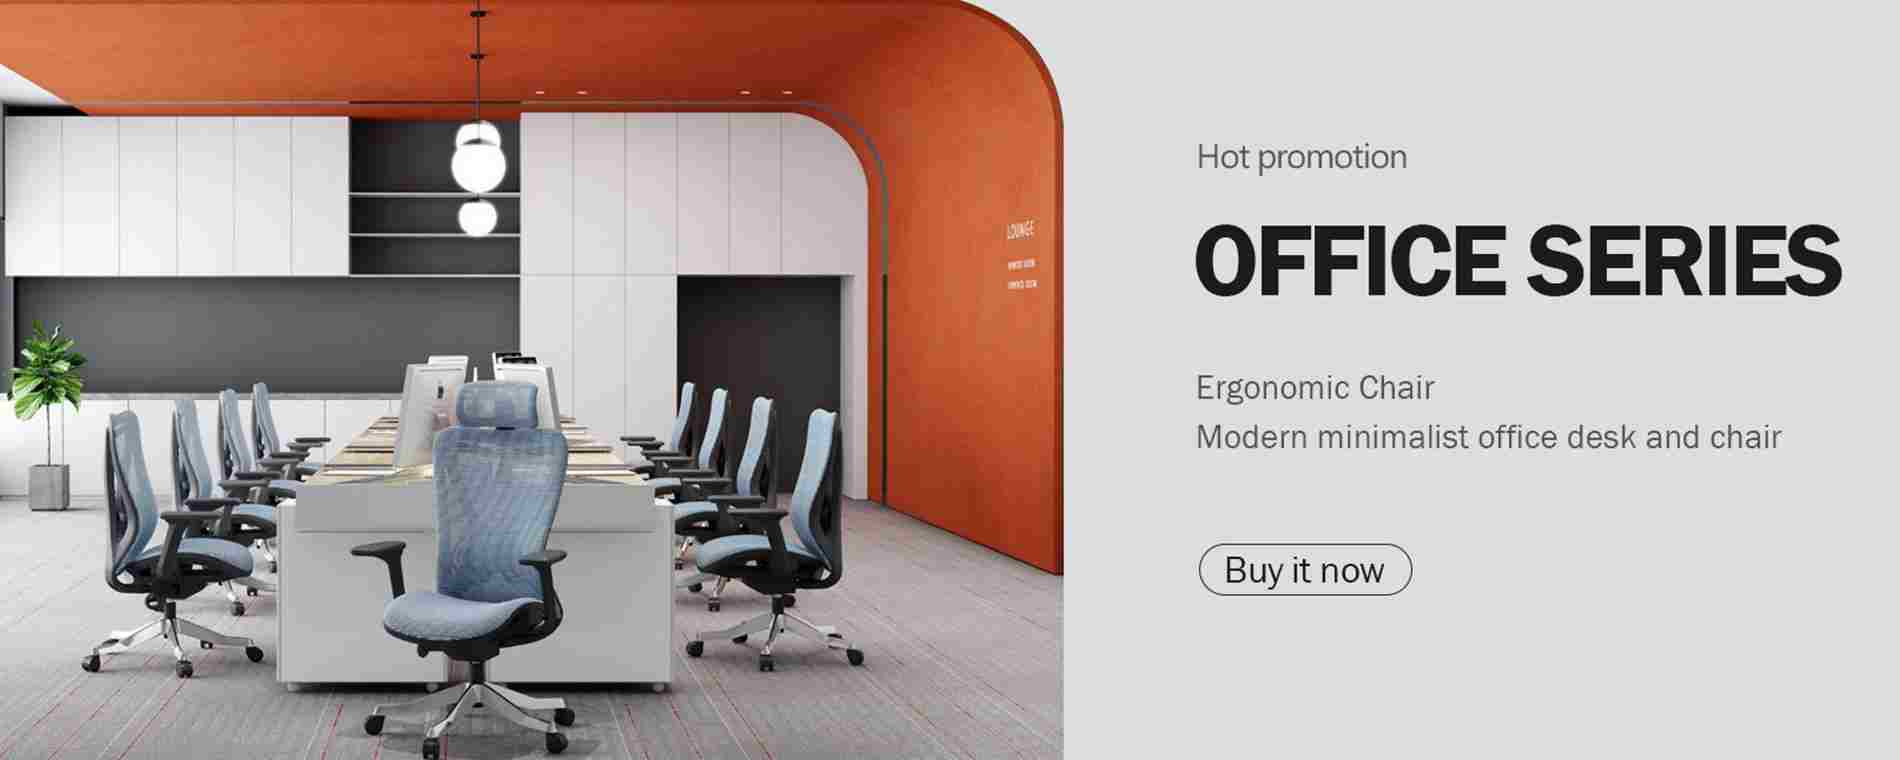 Office furniture solution